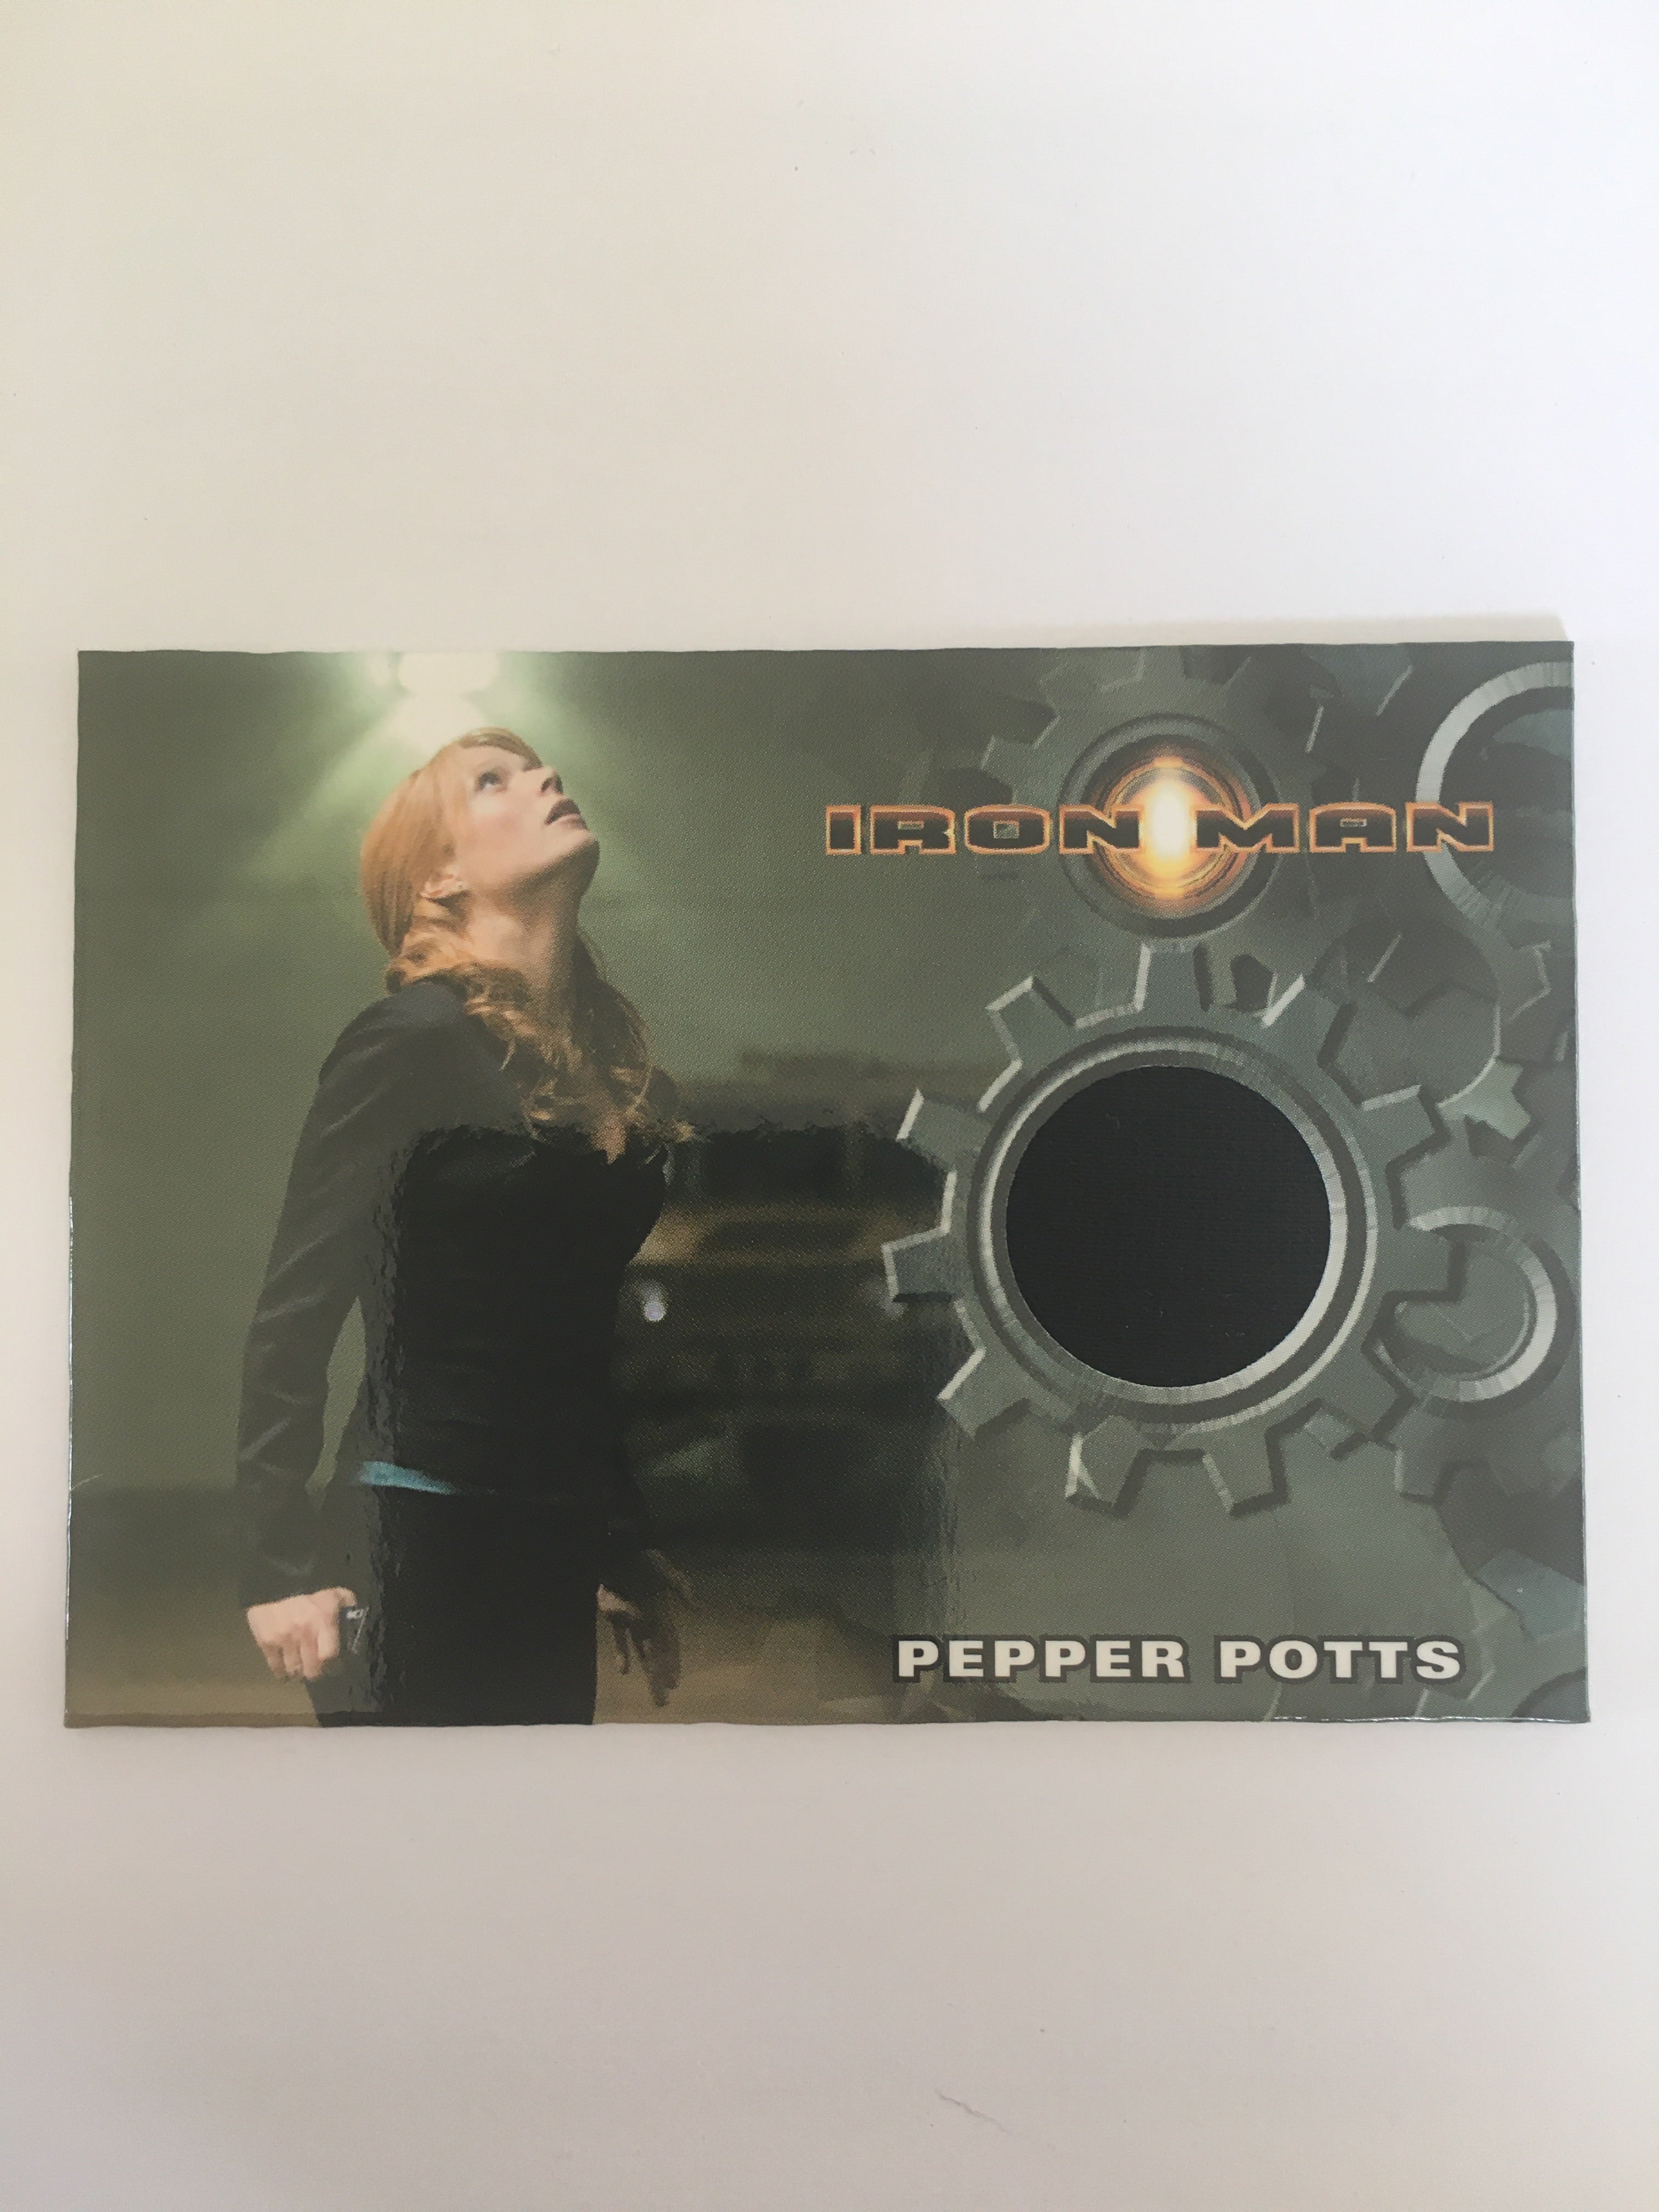 IRON MAN COSTUME (PEPPER POTTS) - Limited & Rare Trading Card